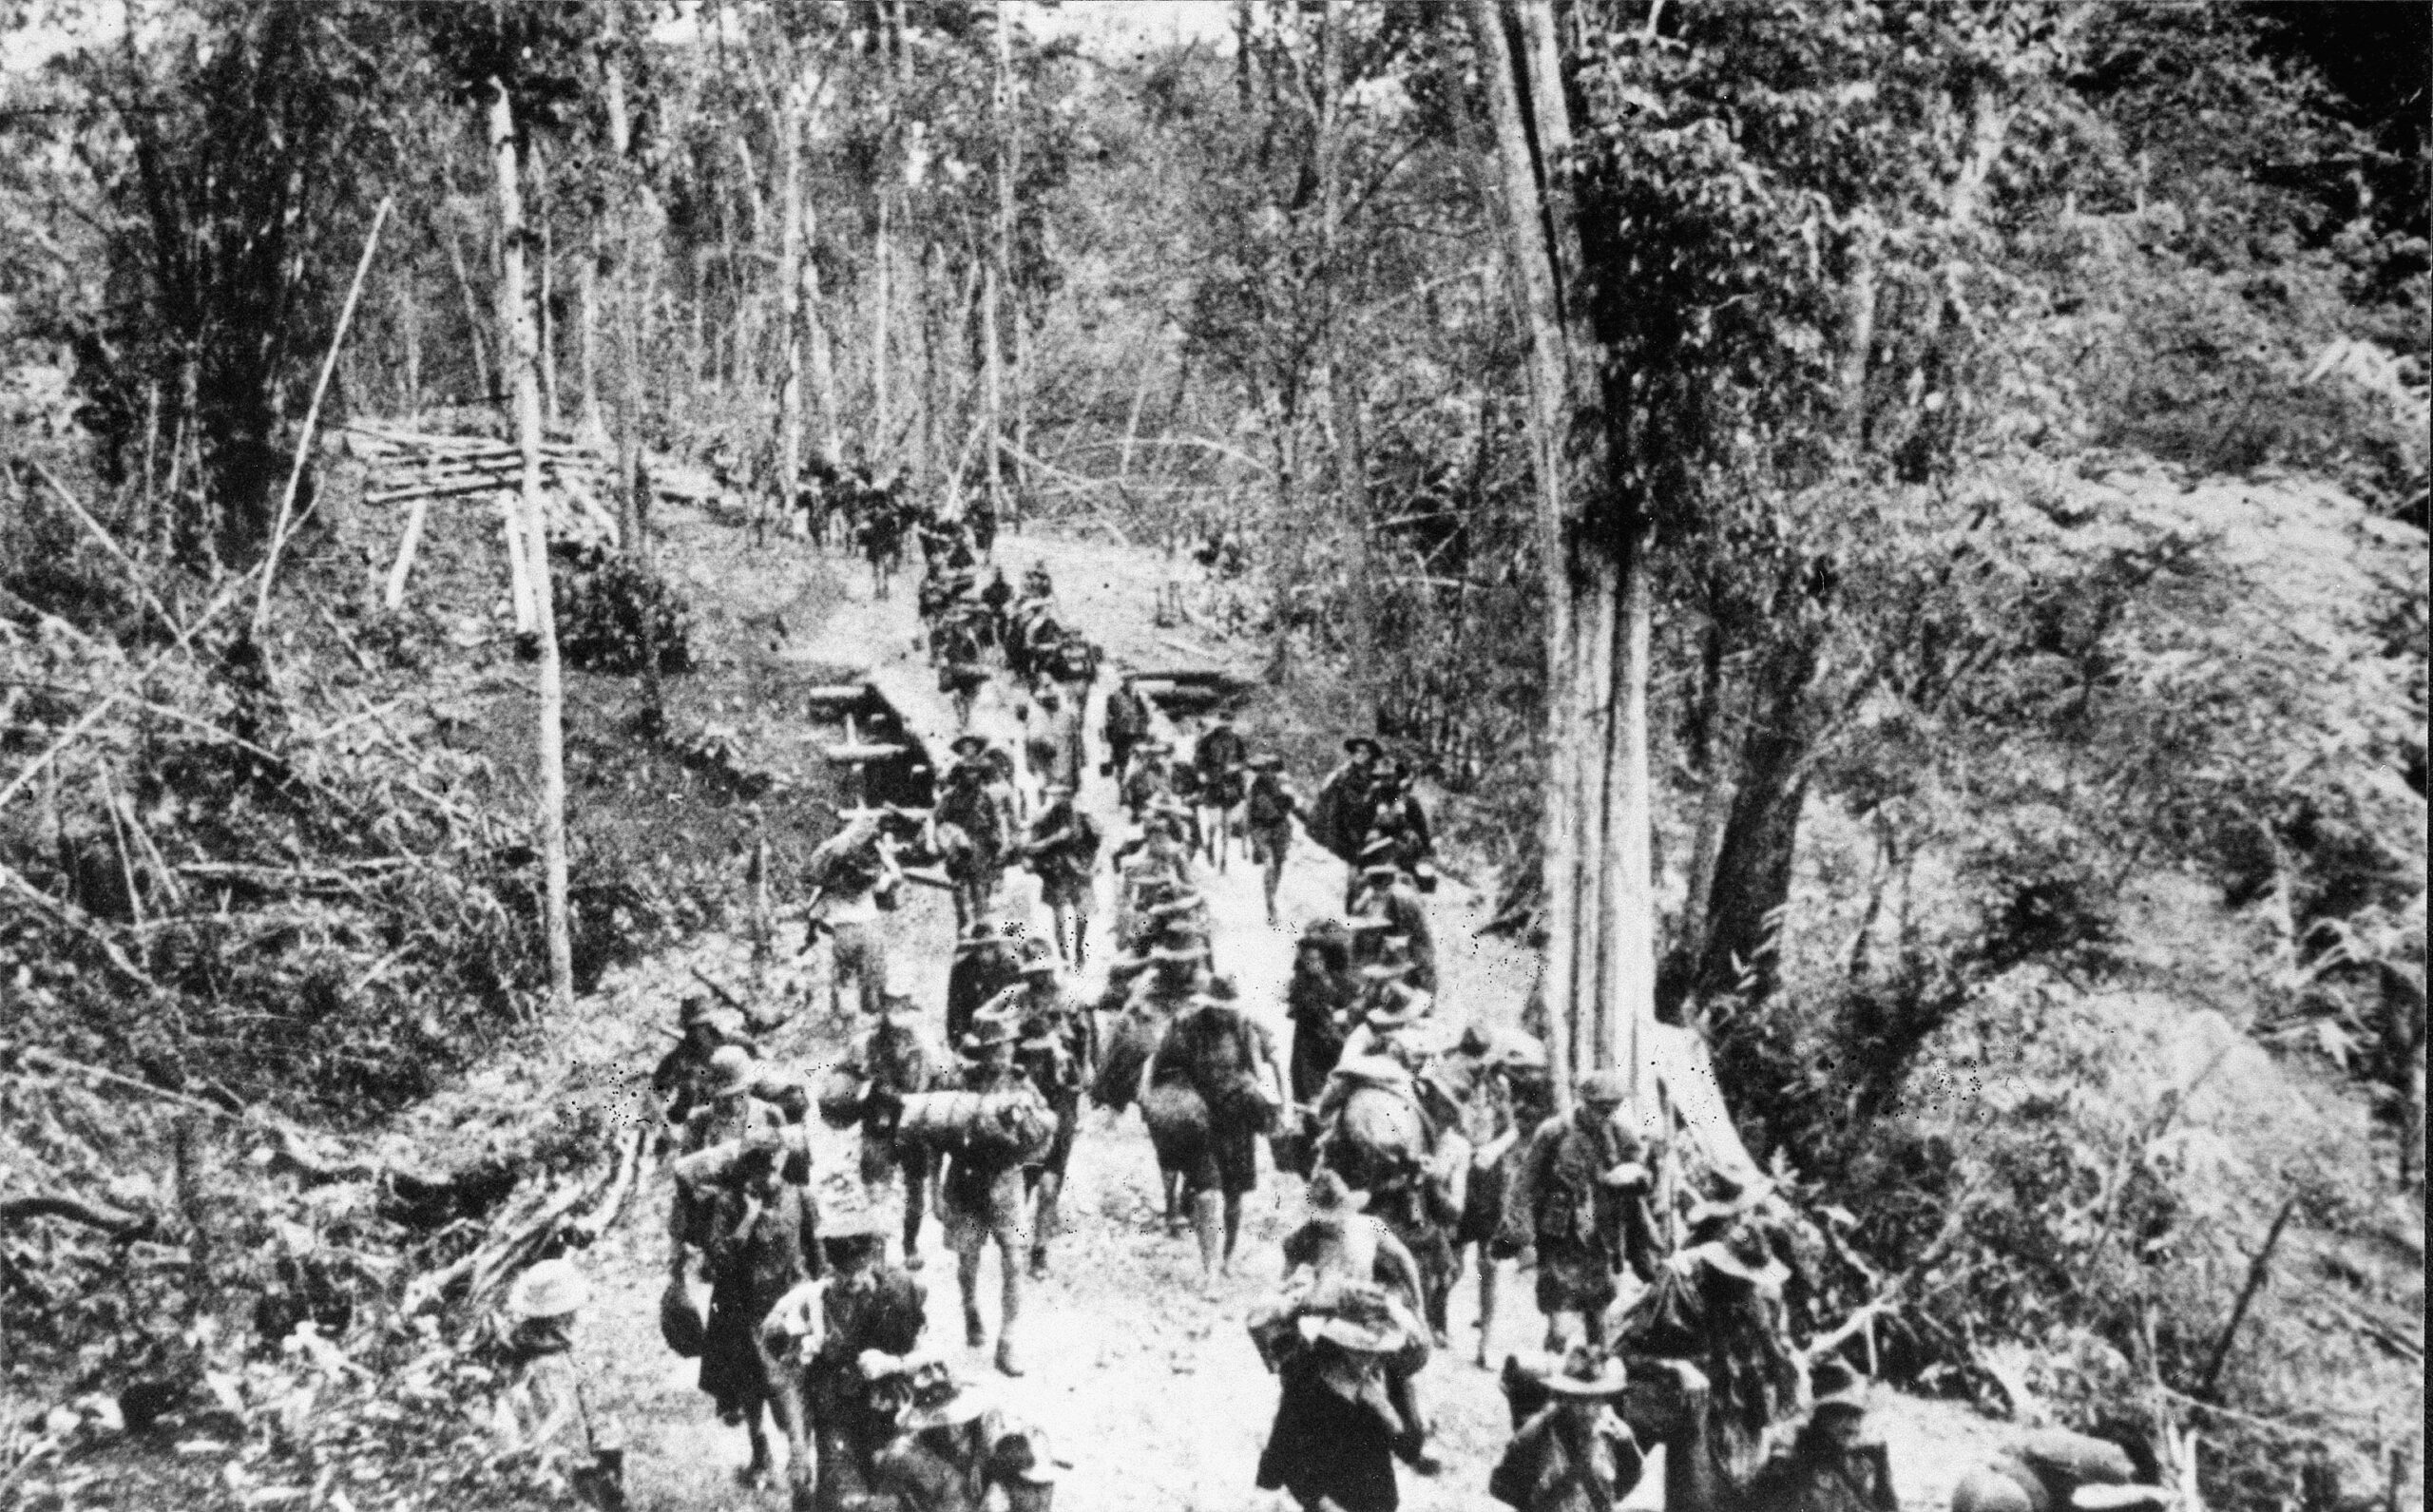 Marching to a new campsite, Allied prisoners of war are relocated to a new area to continue working on the Burma-Thailand Railway. Thousands of prisoners lost their lives working in harsh jungle conditions.